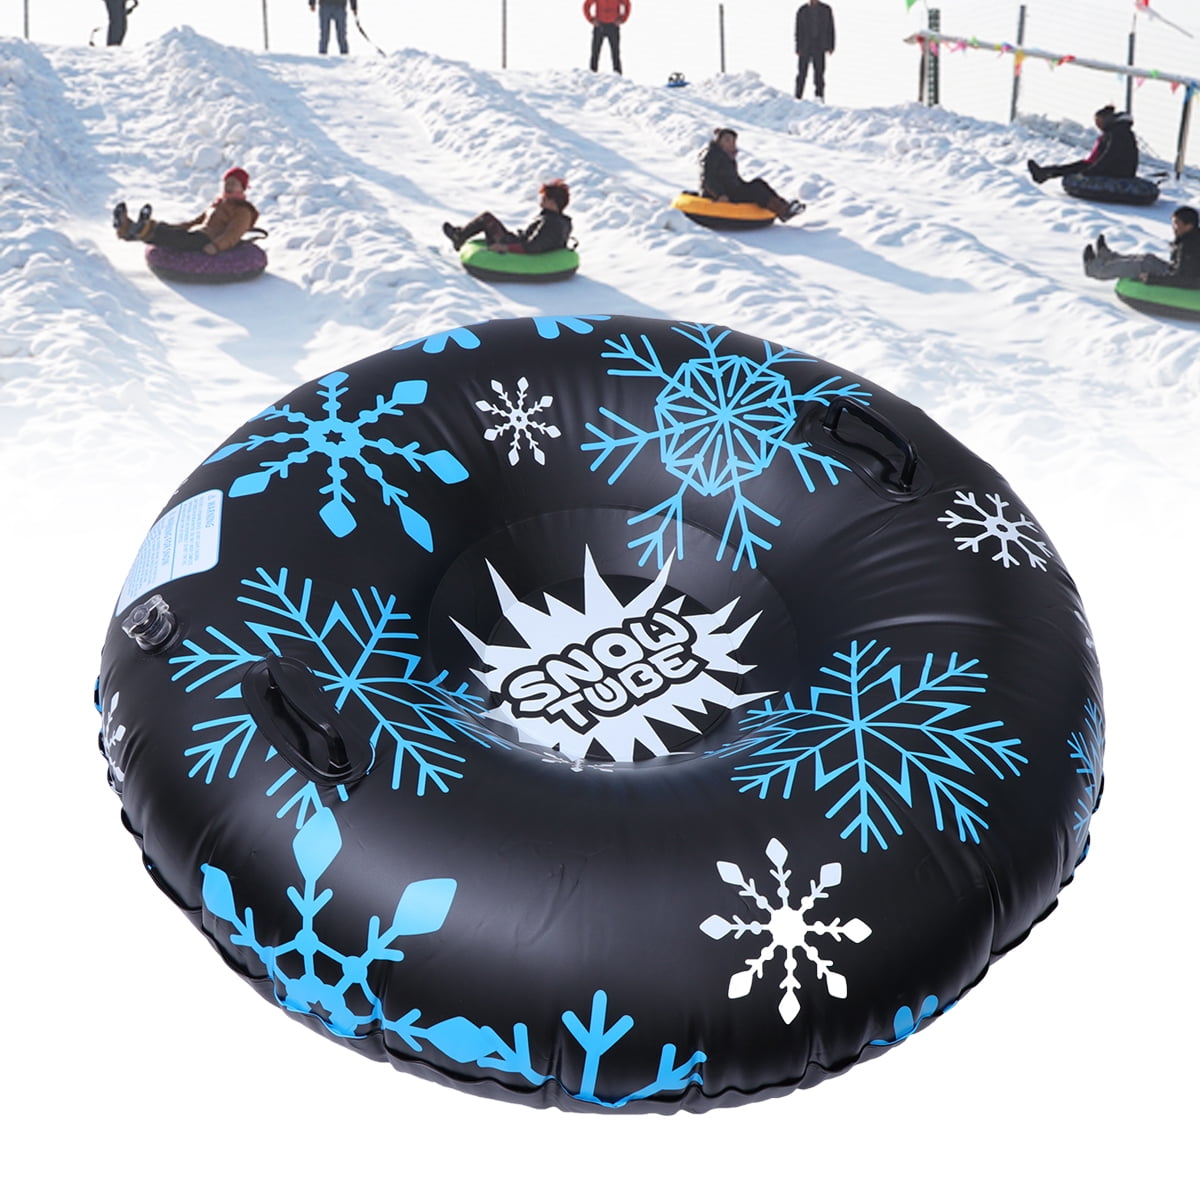 Heavy Duty Snow Tire Snowboard with Handles Anti-Scratch,Freeze-Resistant,Ideal for Winter Outdoor Fun Snow Tube,Inflatable Ski Tube,Inflatable Snow Tube for Sledding for Kids and Adults 